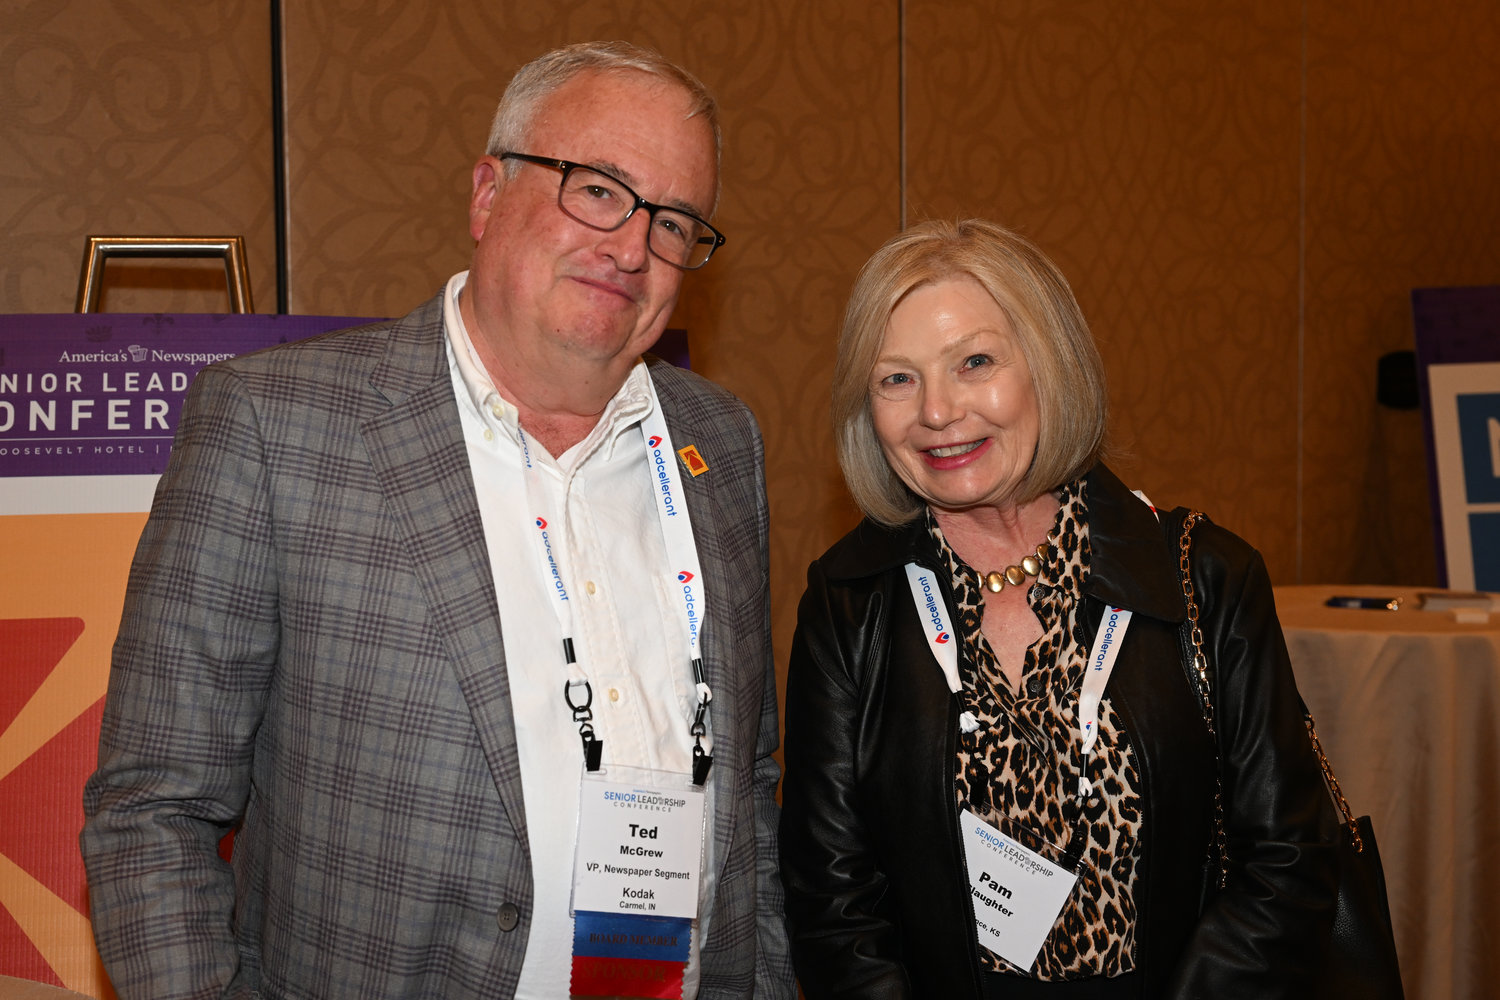 Ted McGrew, VP, Newspaper Segment, Kodak, and Pam Slaughter. (Photo by Jeff Strout)